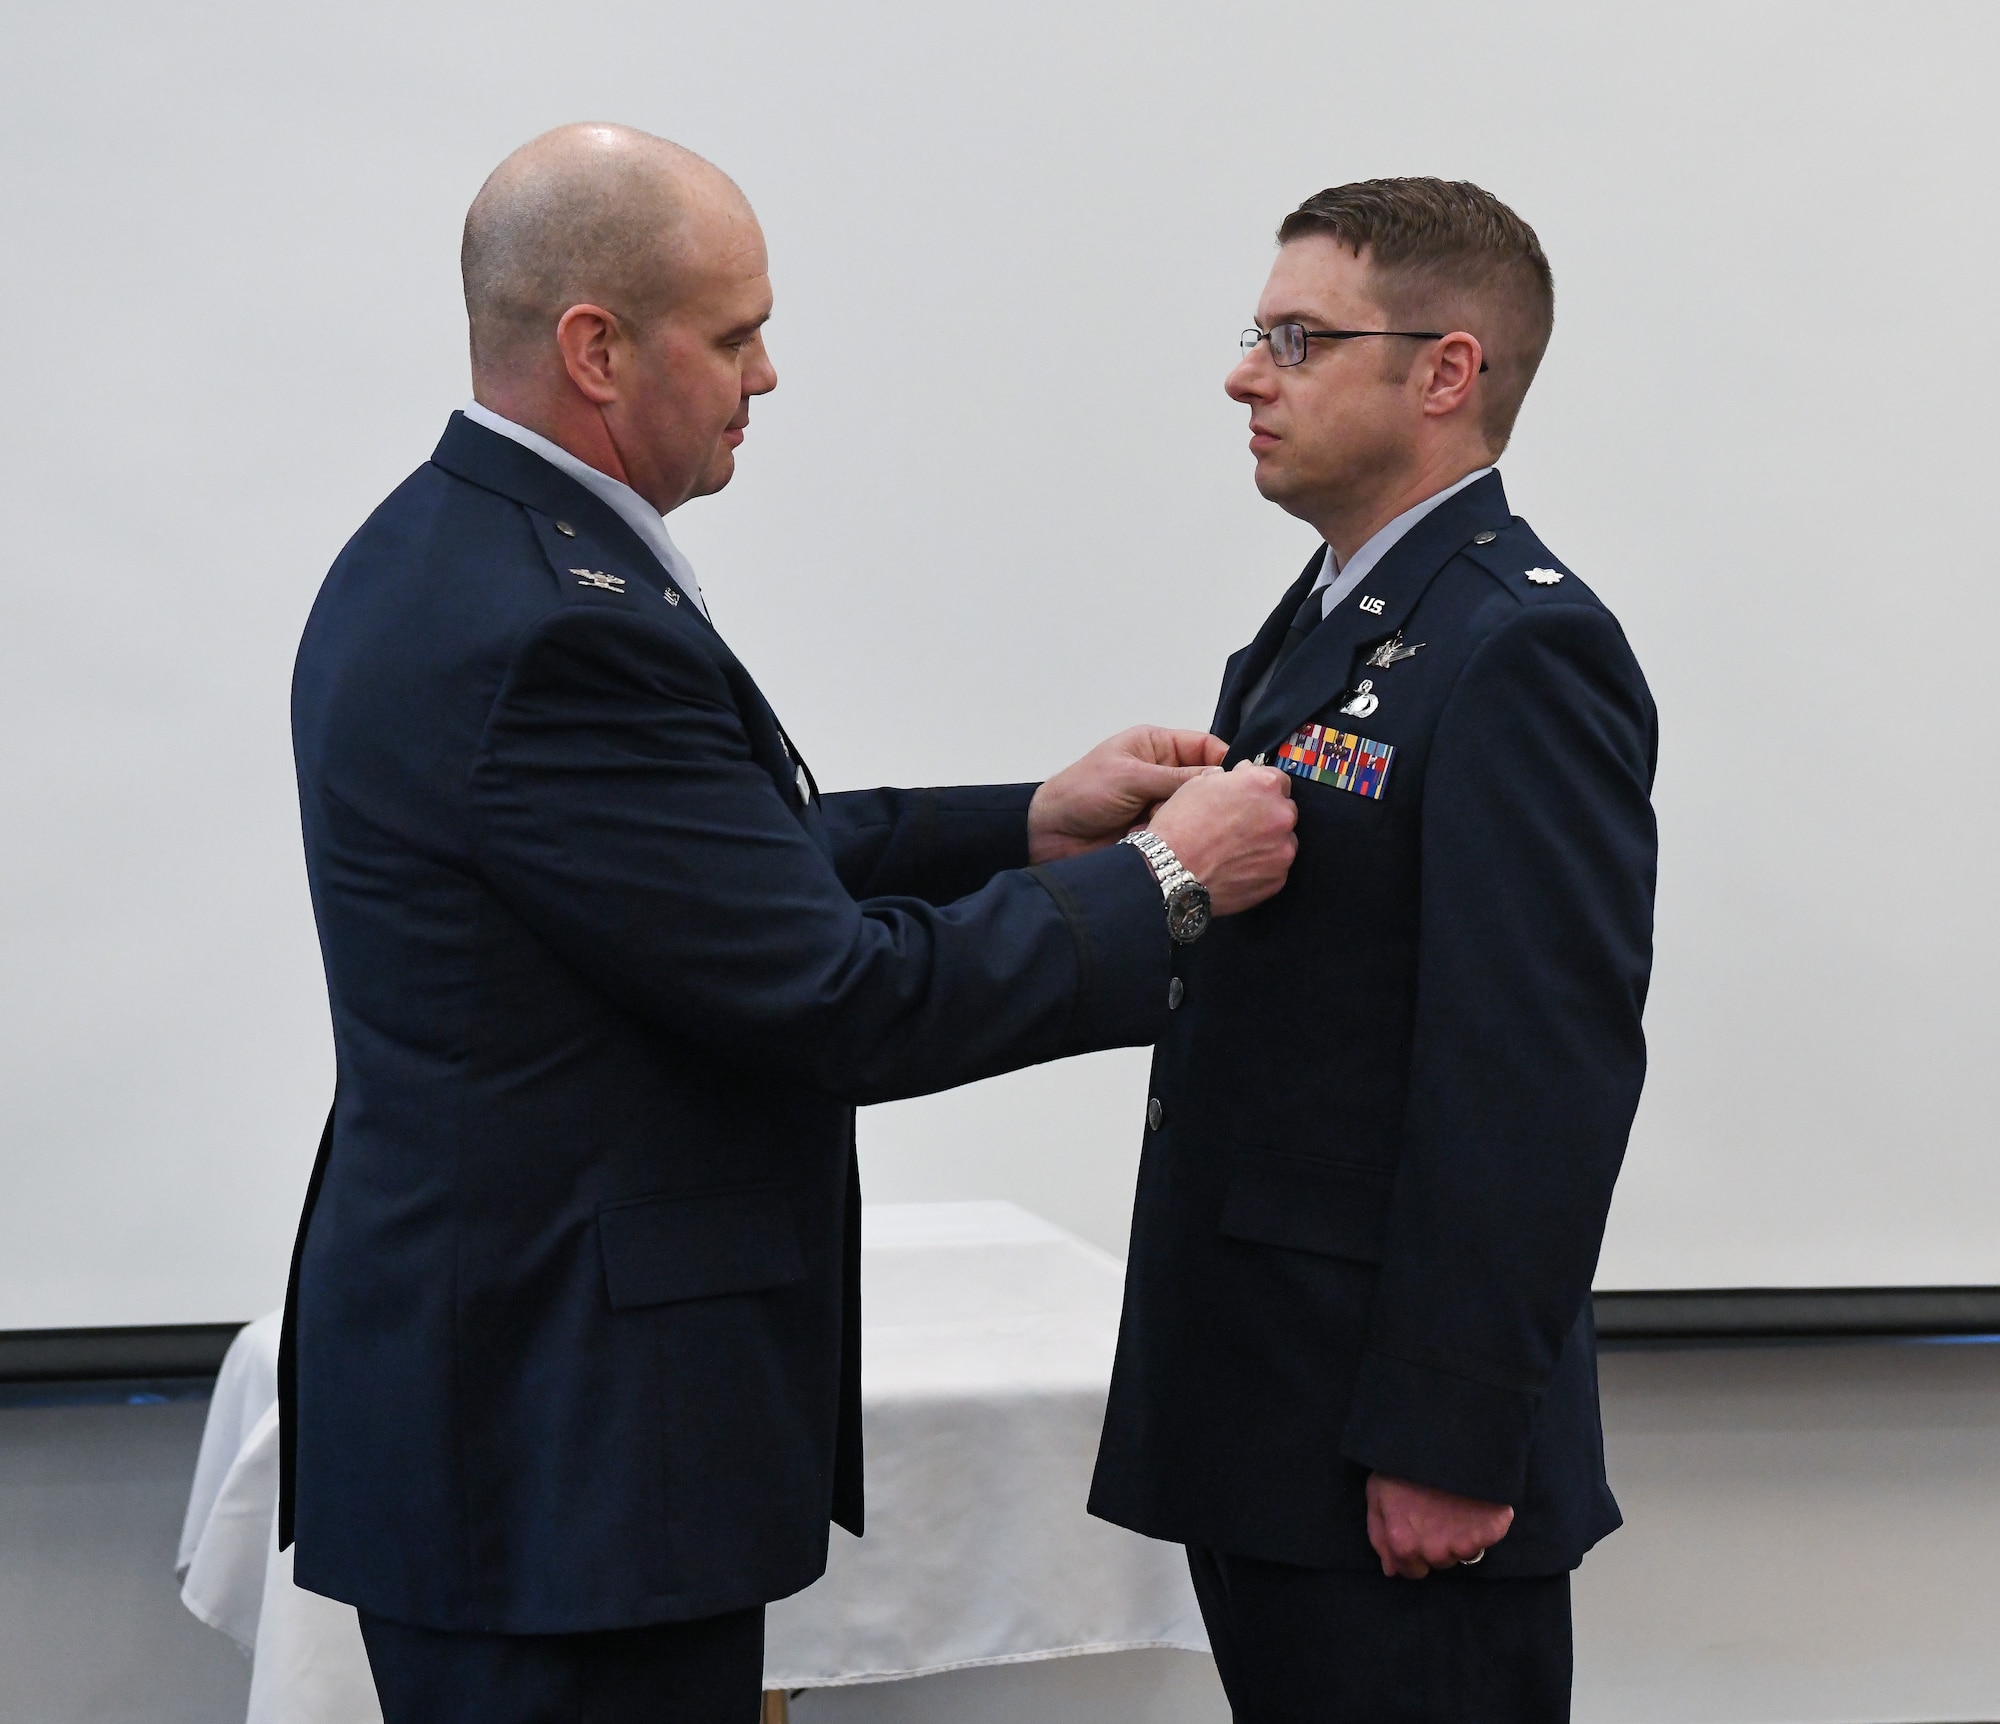 Air Force officer presenting fellow officer with a medal